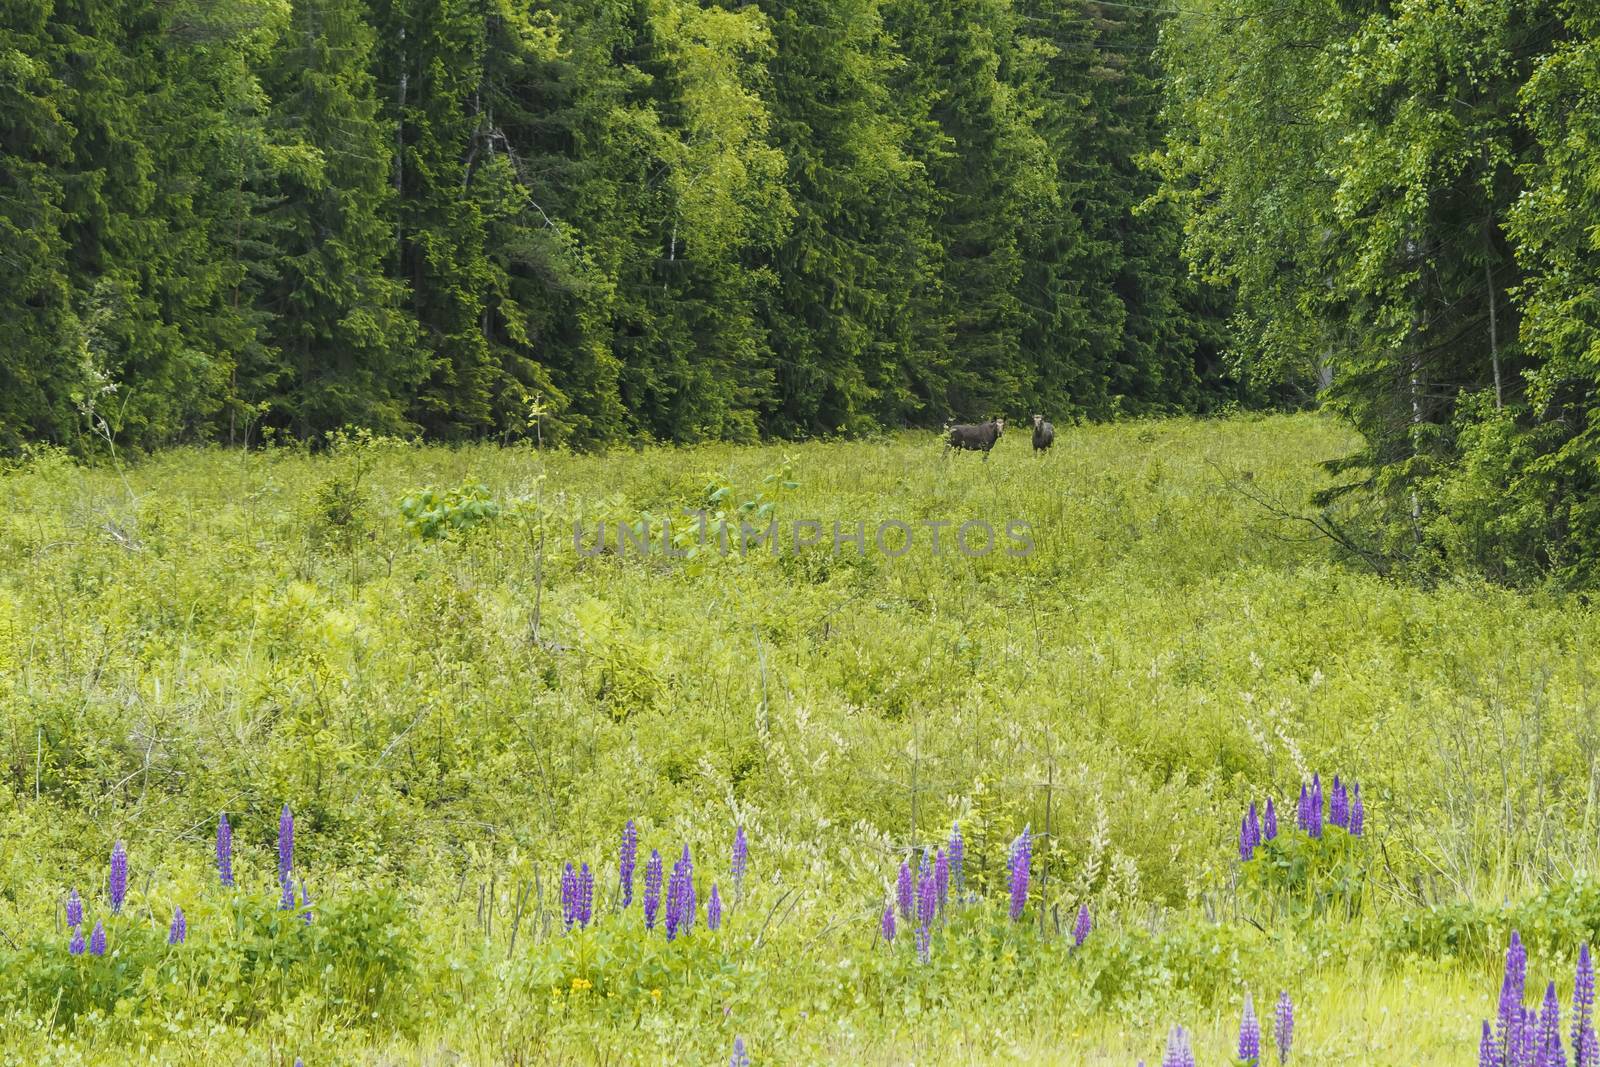 Elk family in a forest glade by galsand